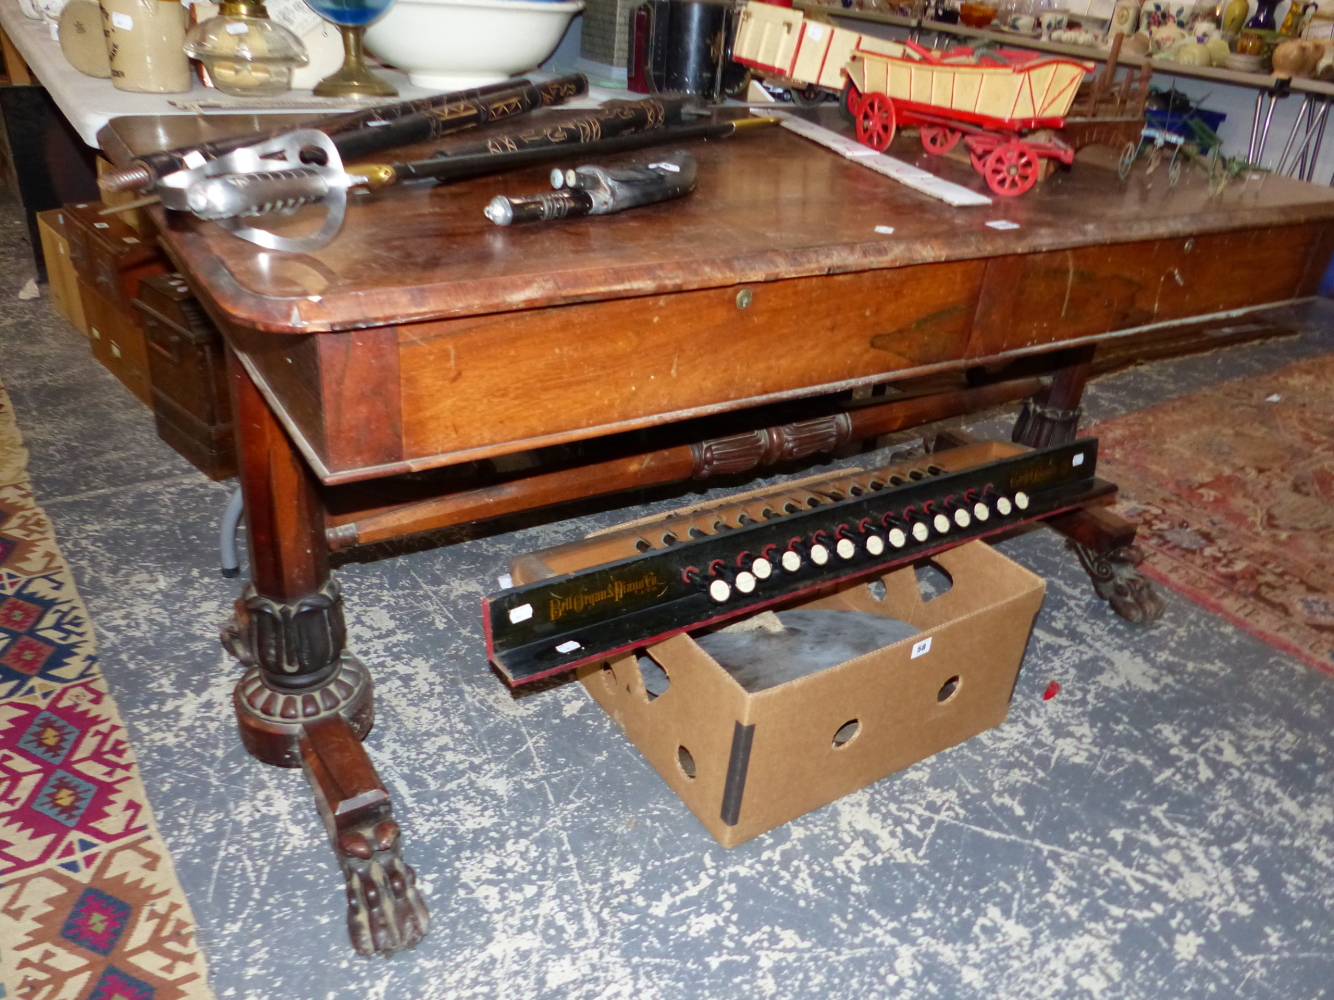 AN EARLY VICTORIAN ROSEWOOD WRITING TABLE WITH TWO DRAWERS, THE OCTAGONAL COLUMNS ATR EACH END FL